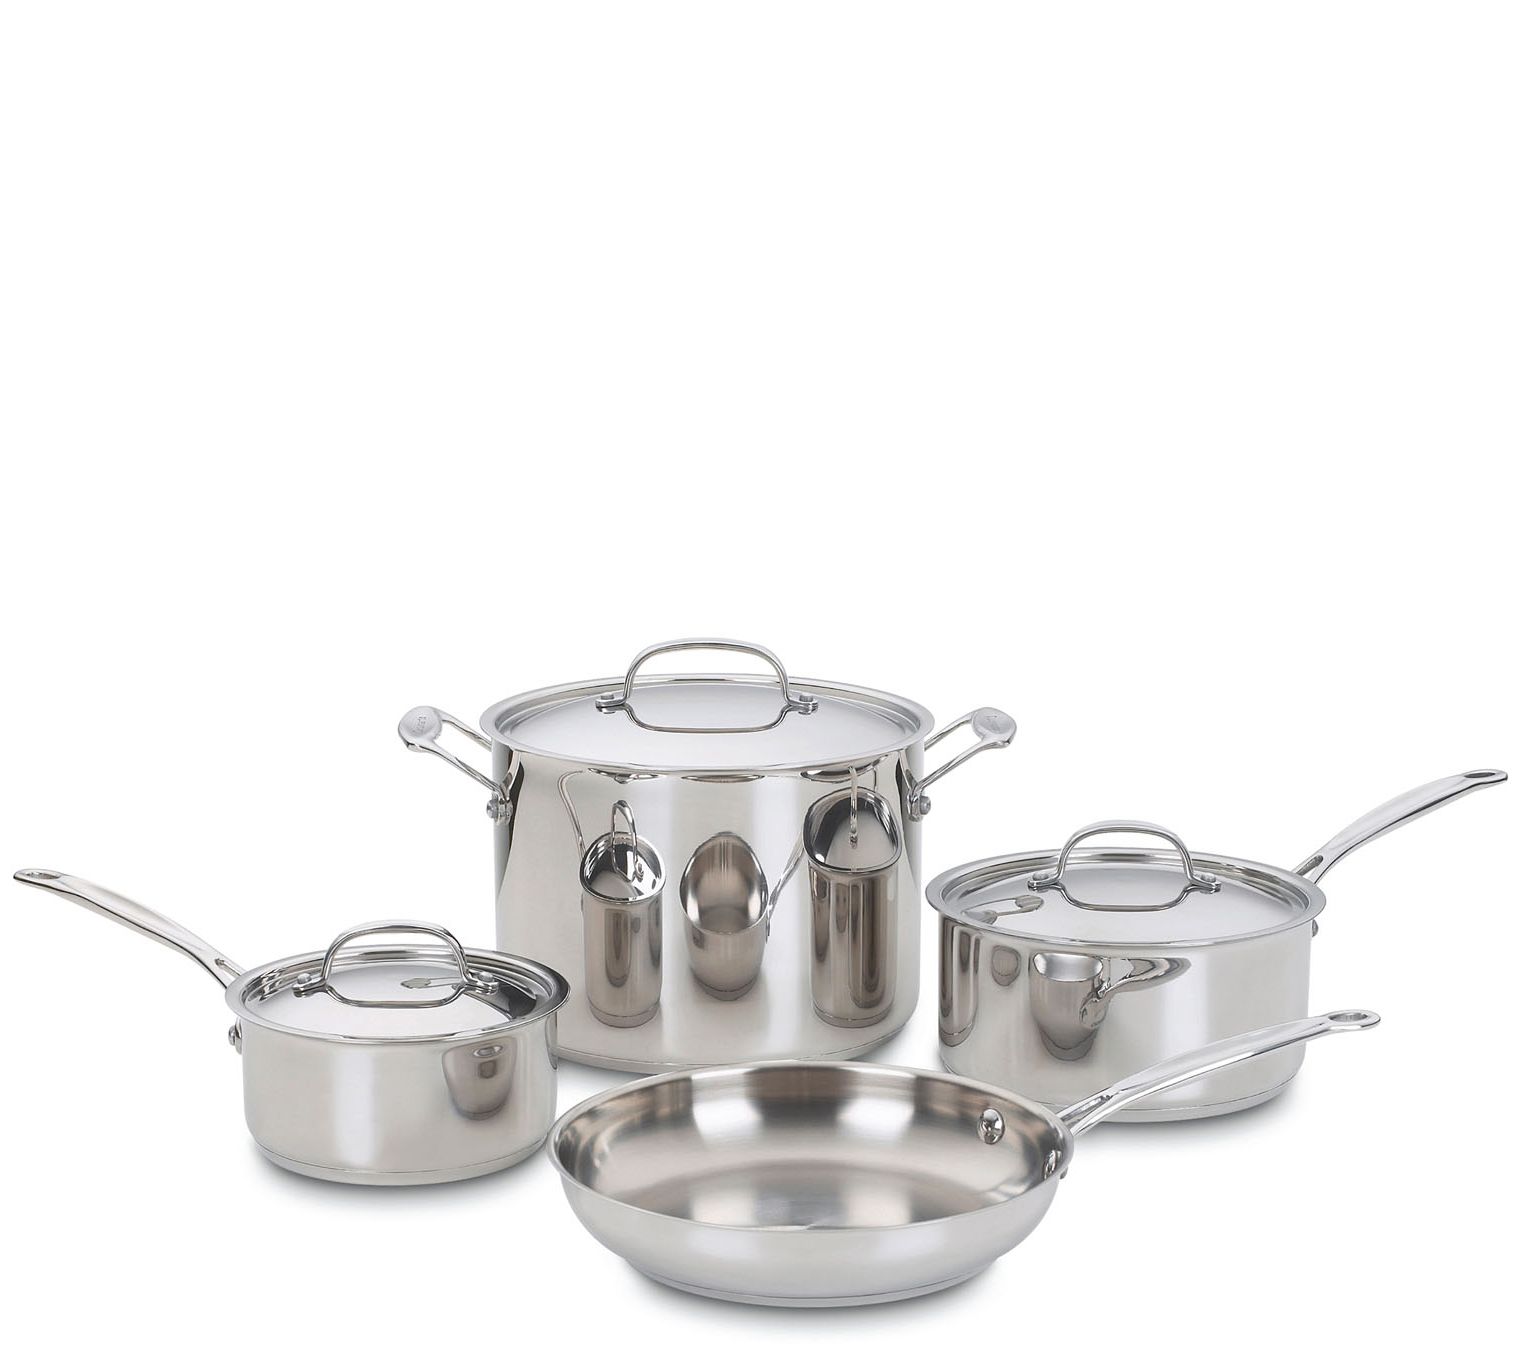 Cuisinart Chef's Classic Stainless 8 Quart Stockpot with Cover